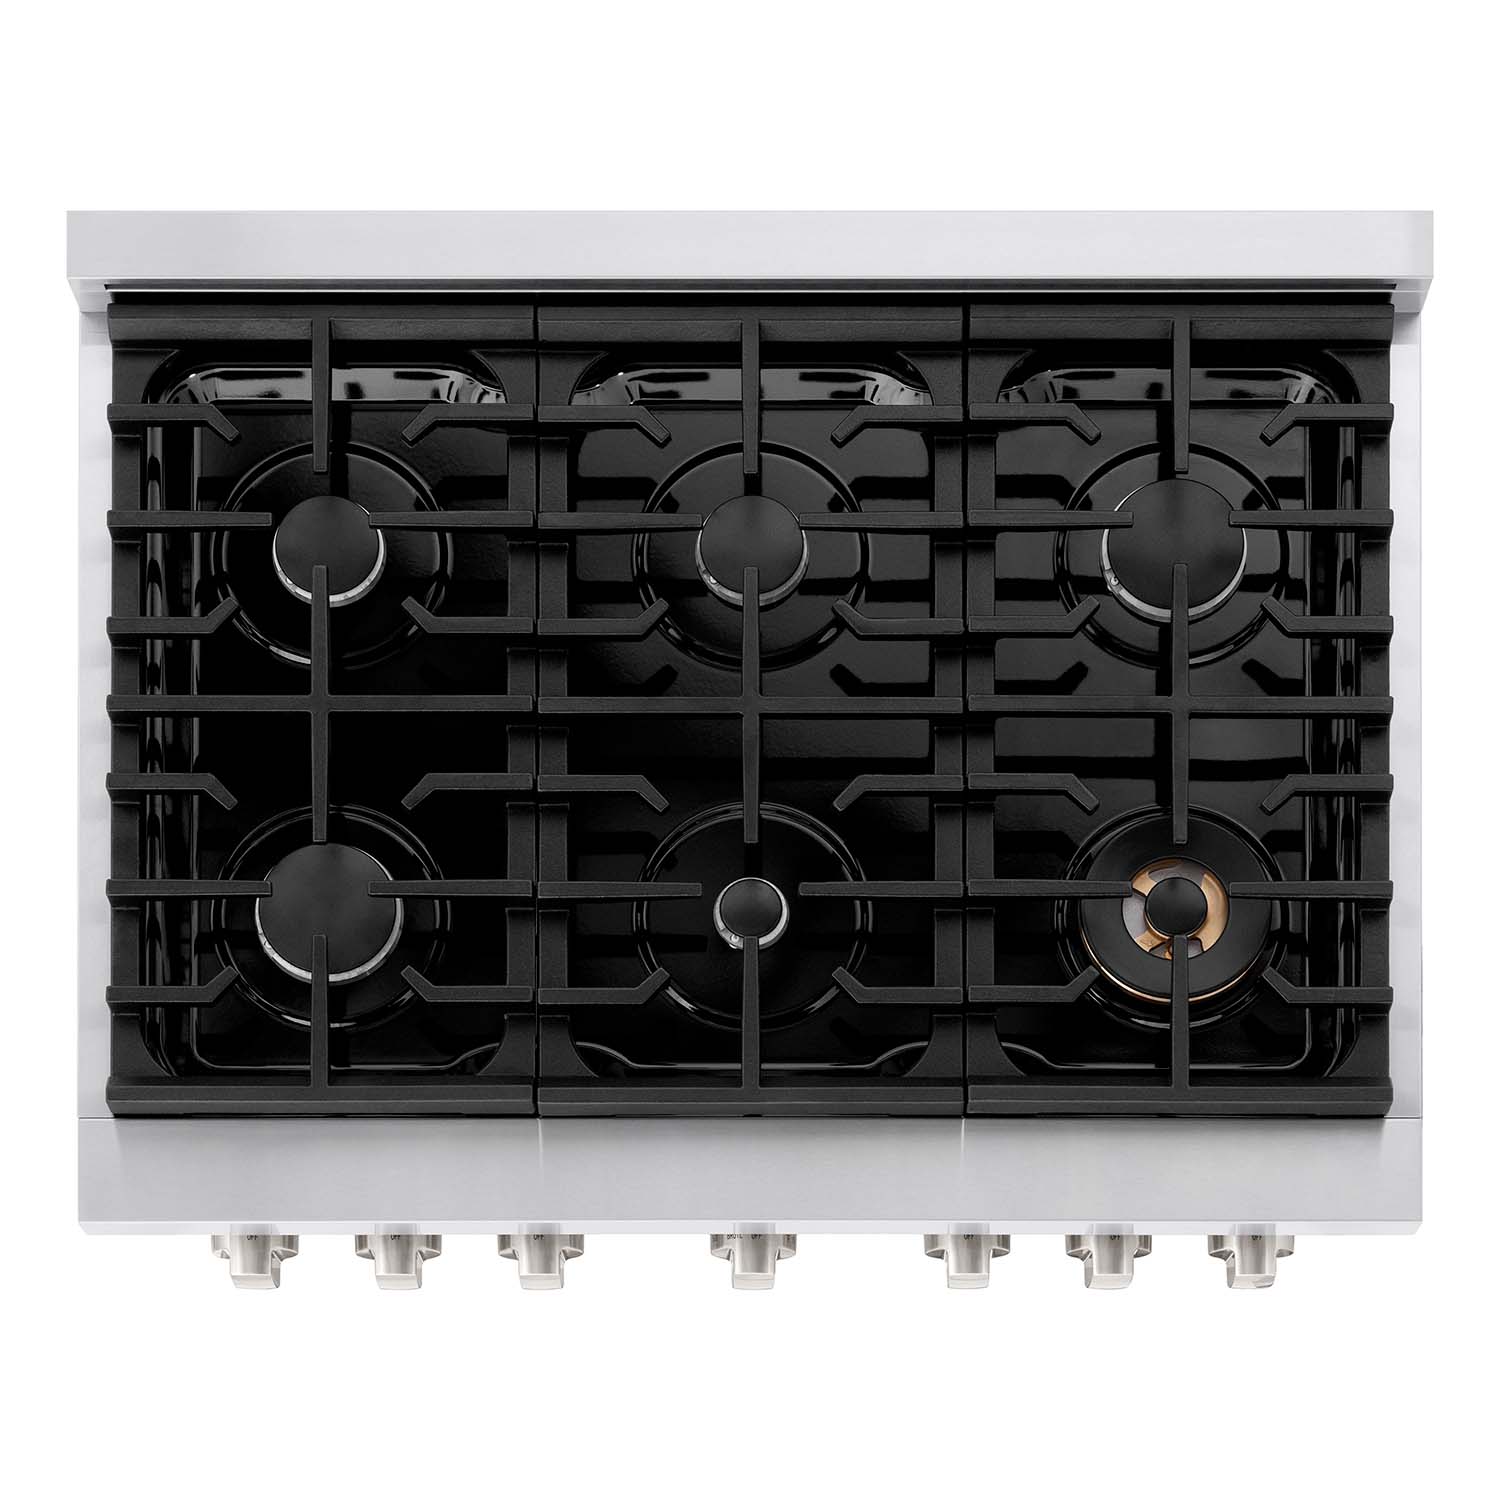 ZLINE 36" Stainless Steel Gas Range cooktop with 6 burners and black porcelain finish.